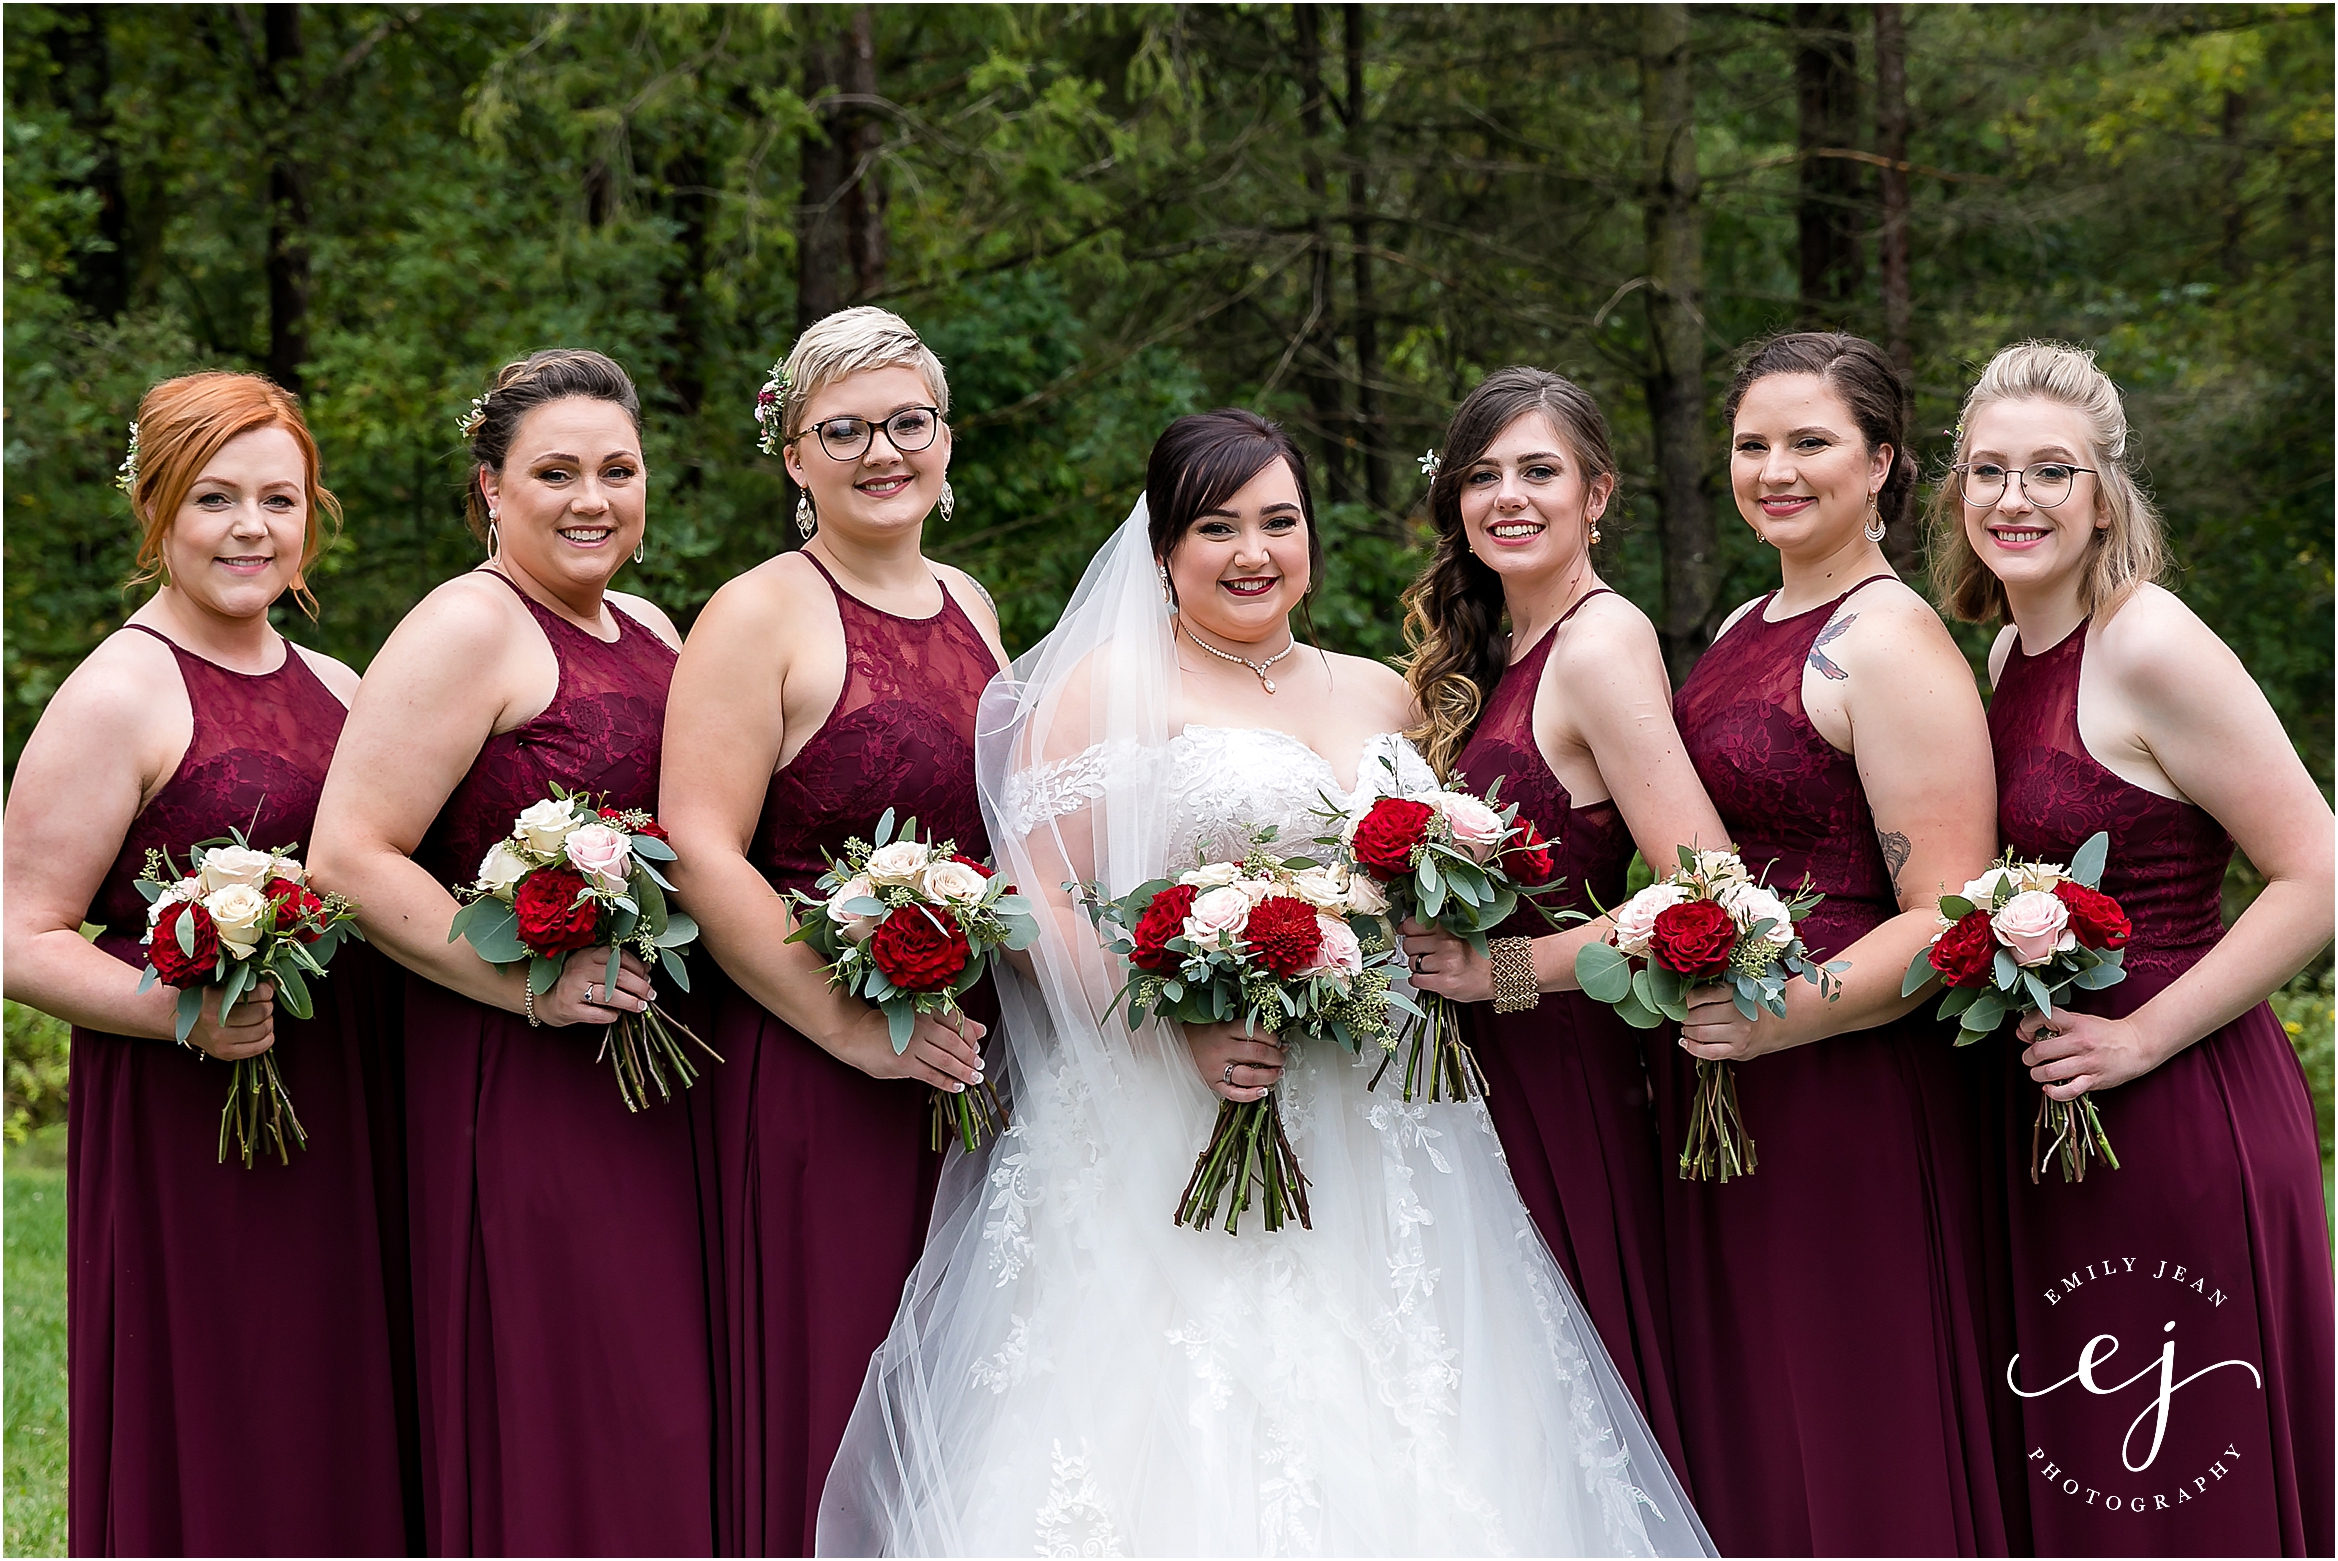 red wine bridesmaid dresses with pink and red bouquets at winnebago springs wedding venue minnesota